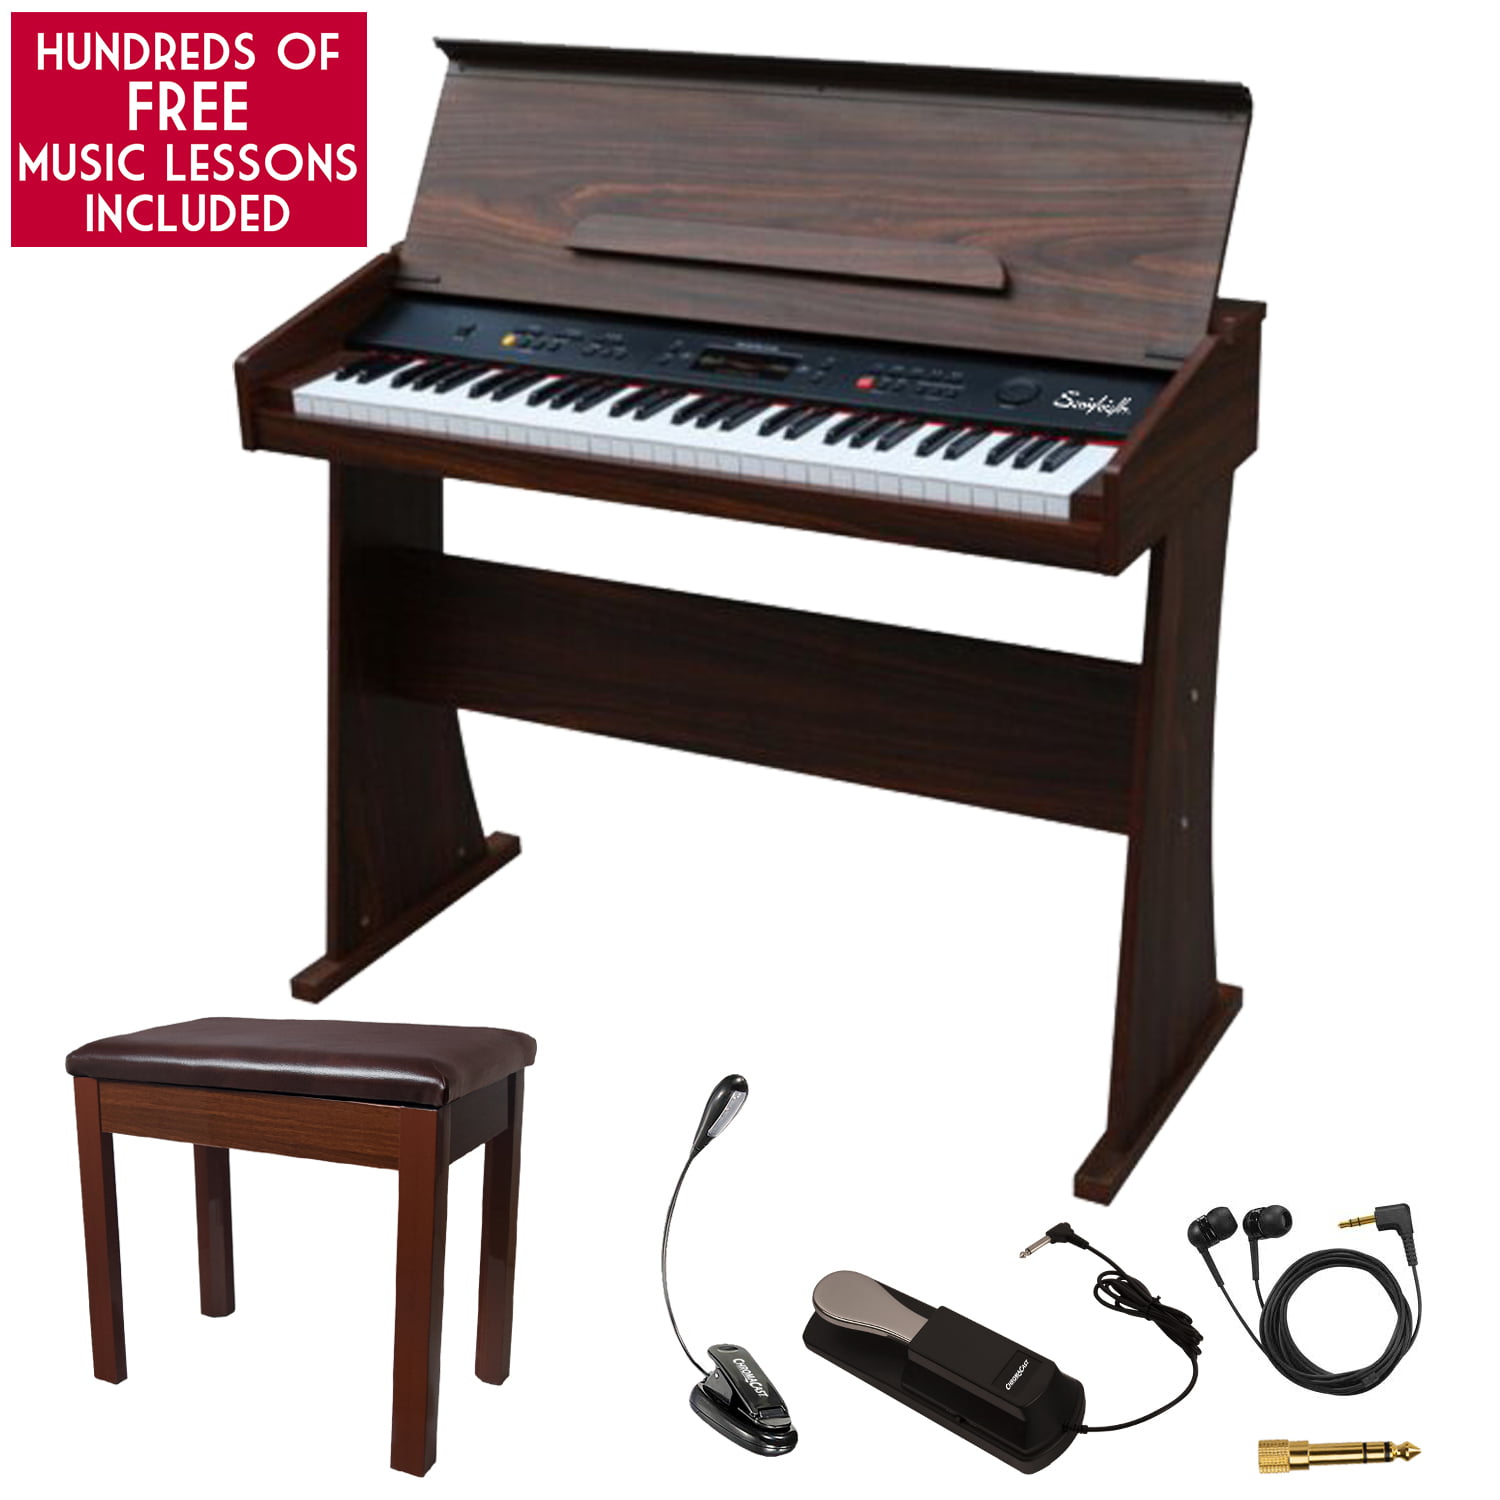 Sawtooth 61-Key Digital Console Piano with Bench, Sustain Pedal